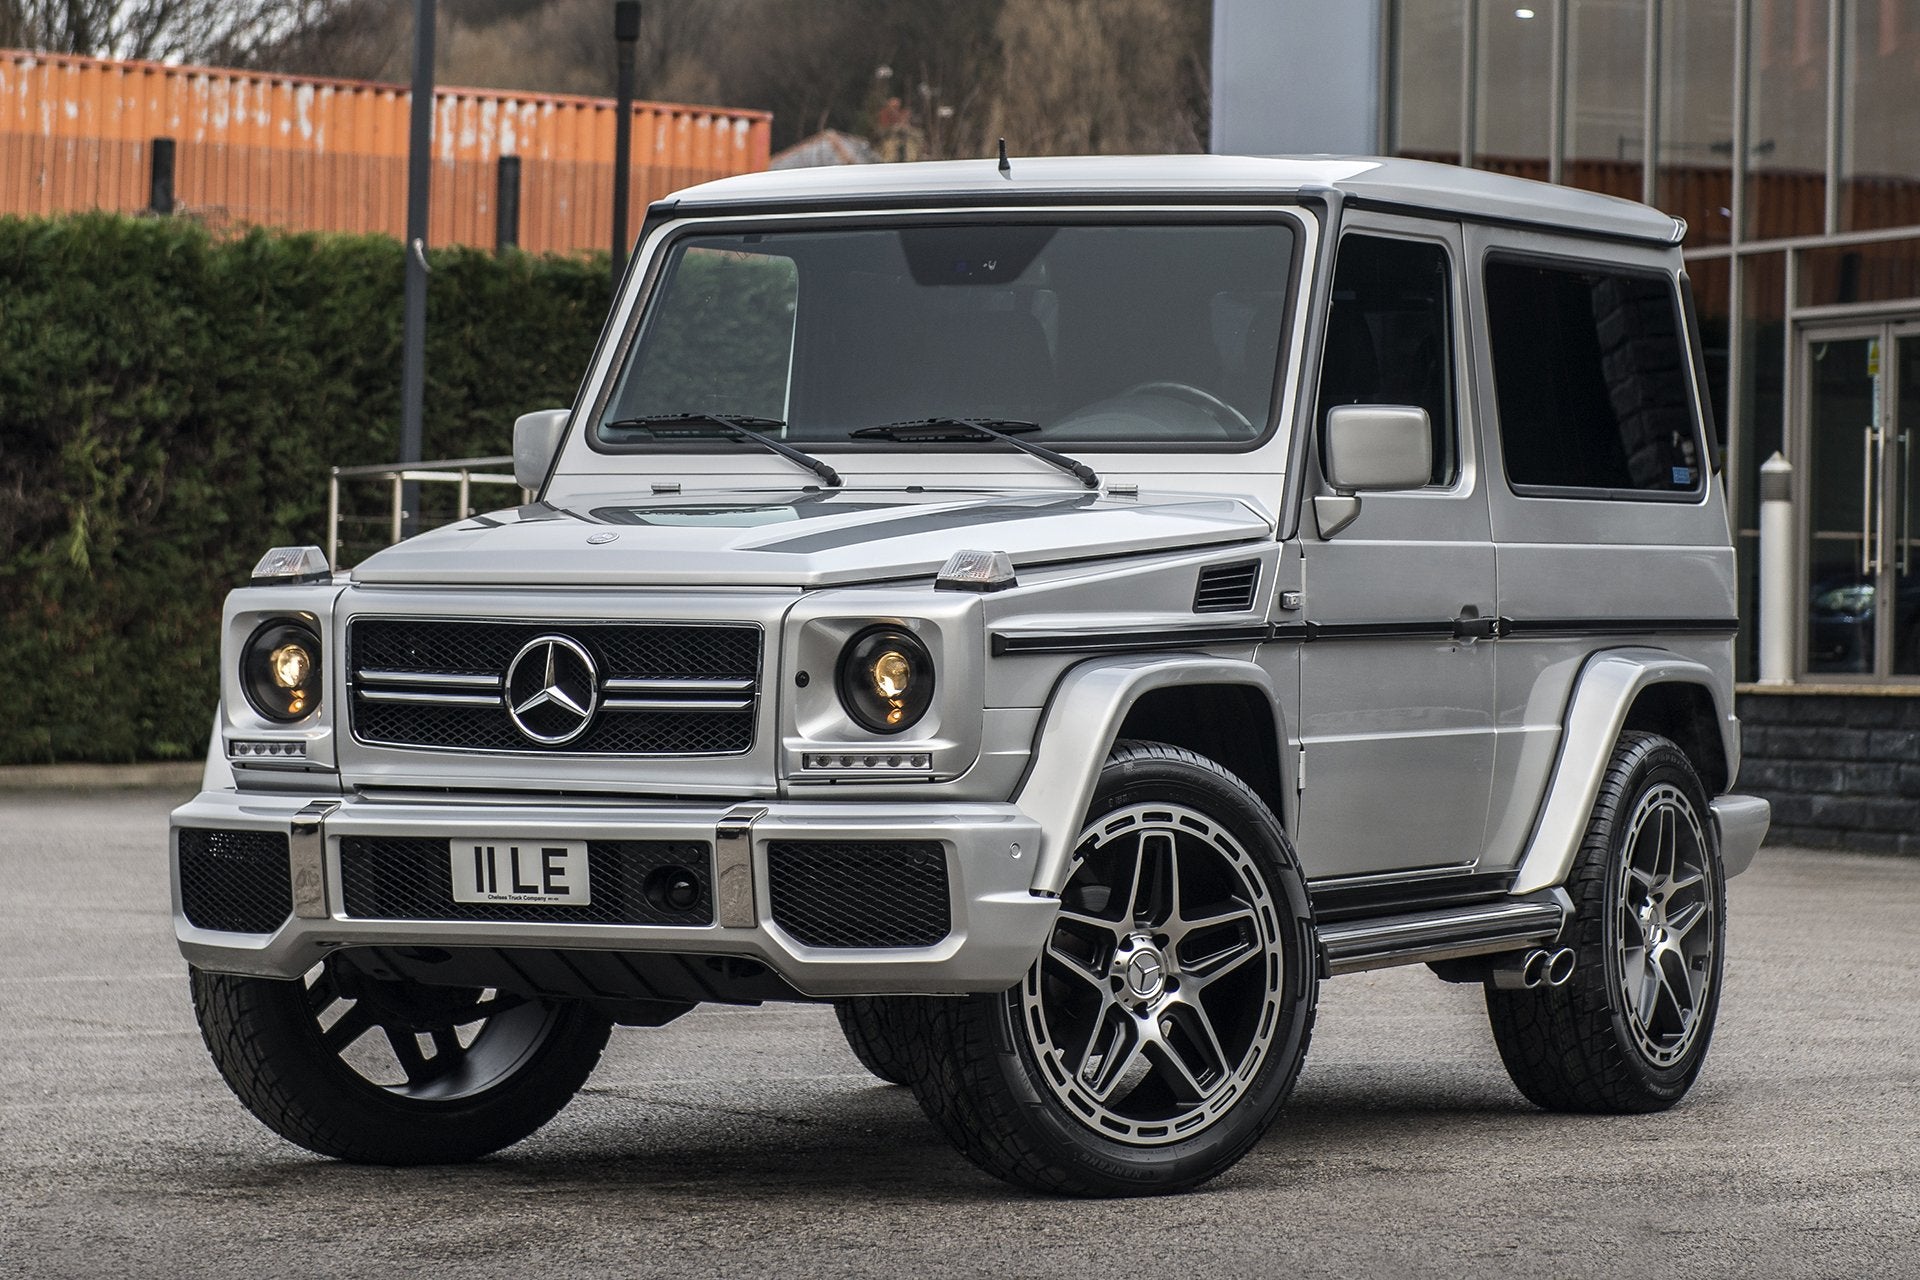 Mercedes G-Wagon 2 Door (1990-2006) G63 Style Exterior Body Styling Pack by Chelsea Truck Company - Image 2008